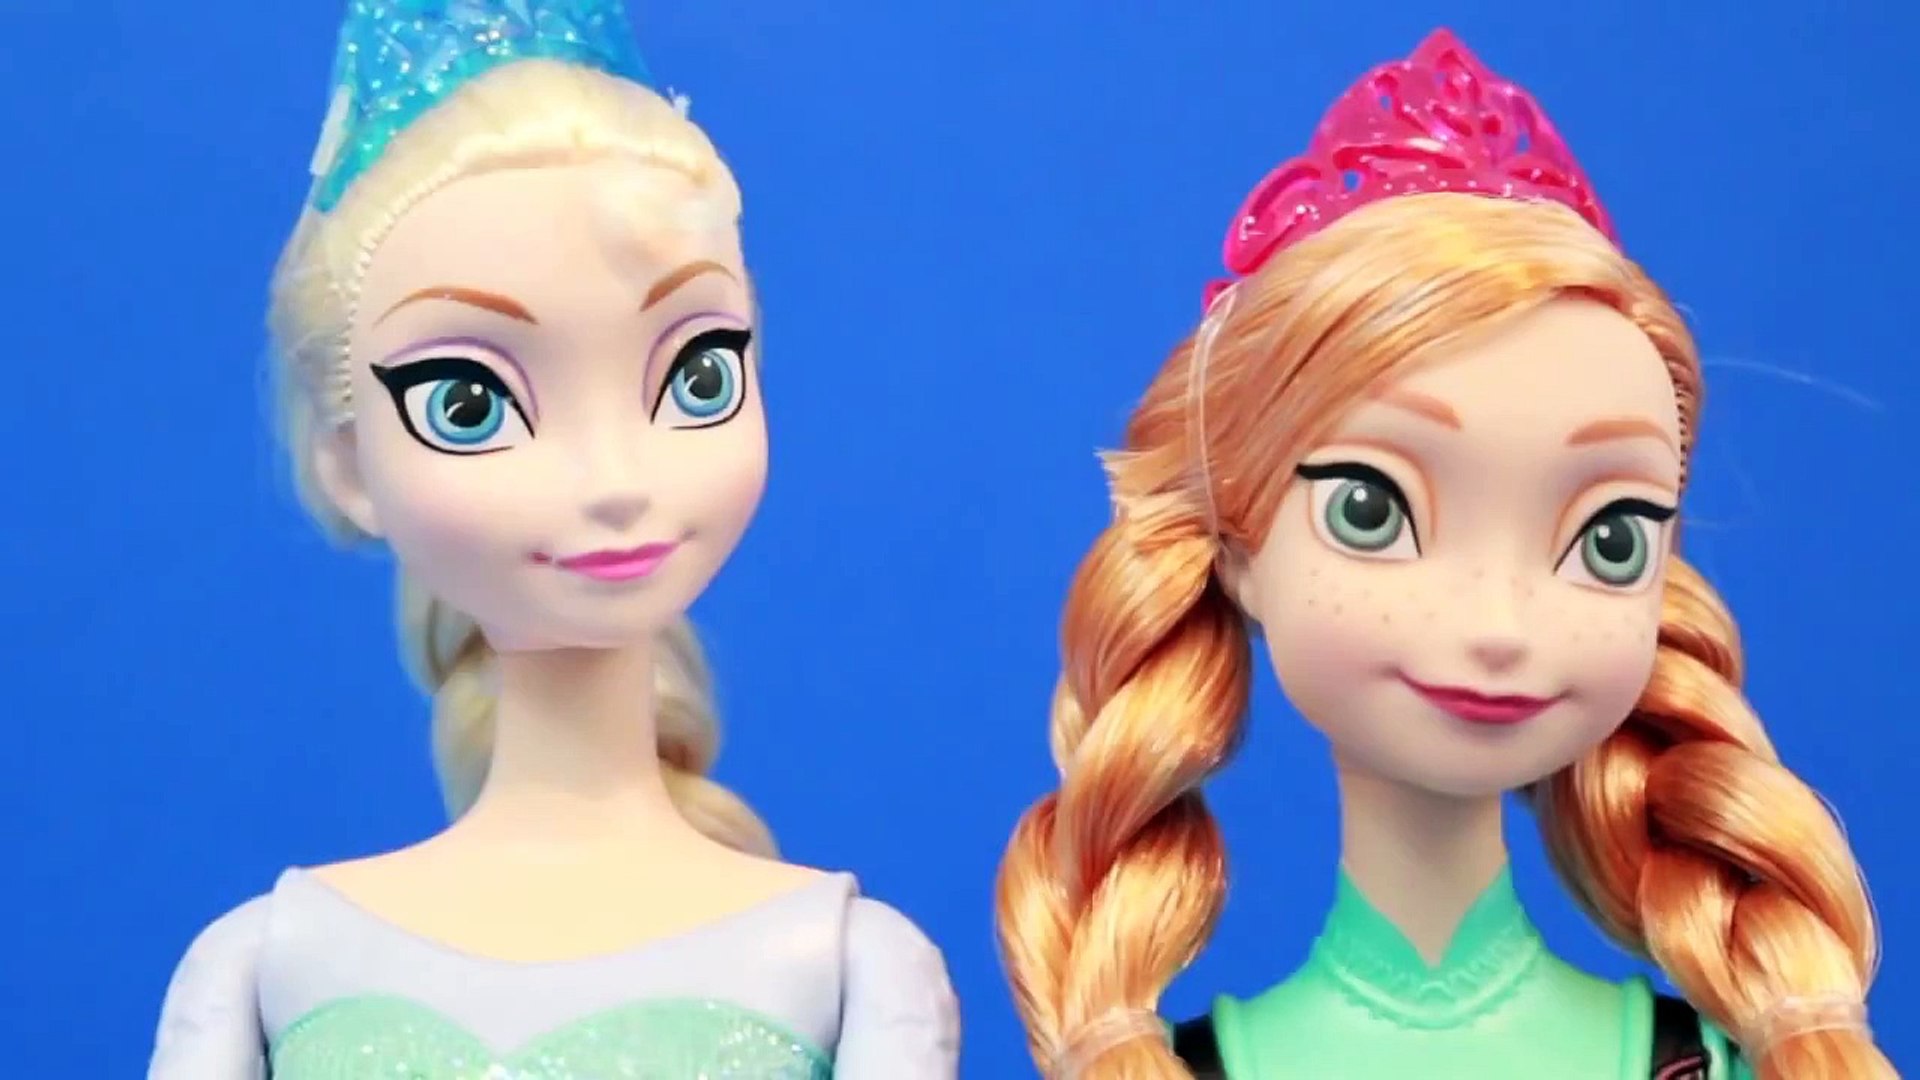 Frozen Friends Family Collection Disney Barbie WAL-MART Exclusive Anna Elsa  Olaf Sven MATTEL TOYS - Dailymotion Video